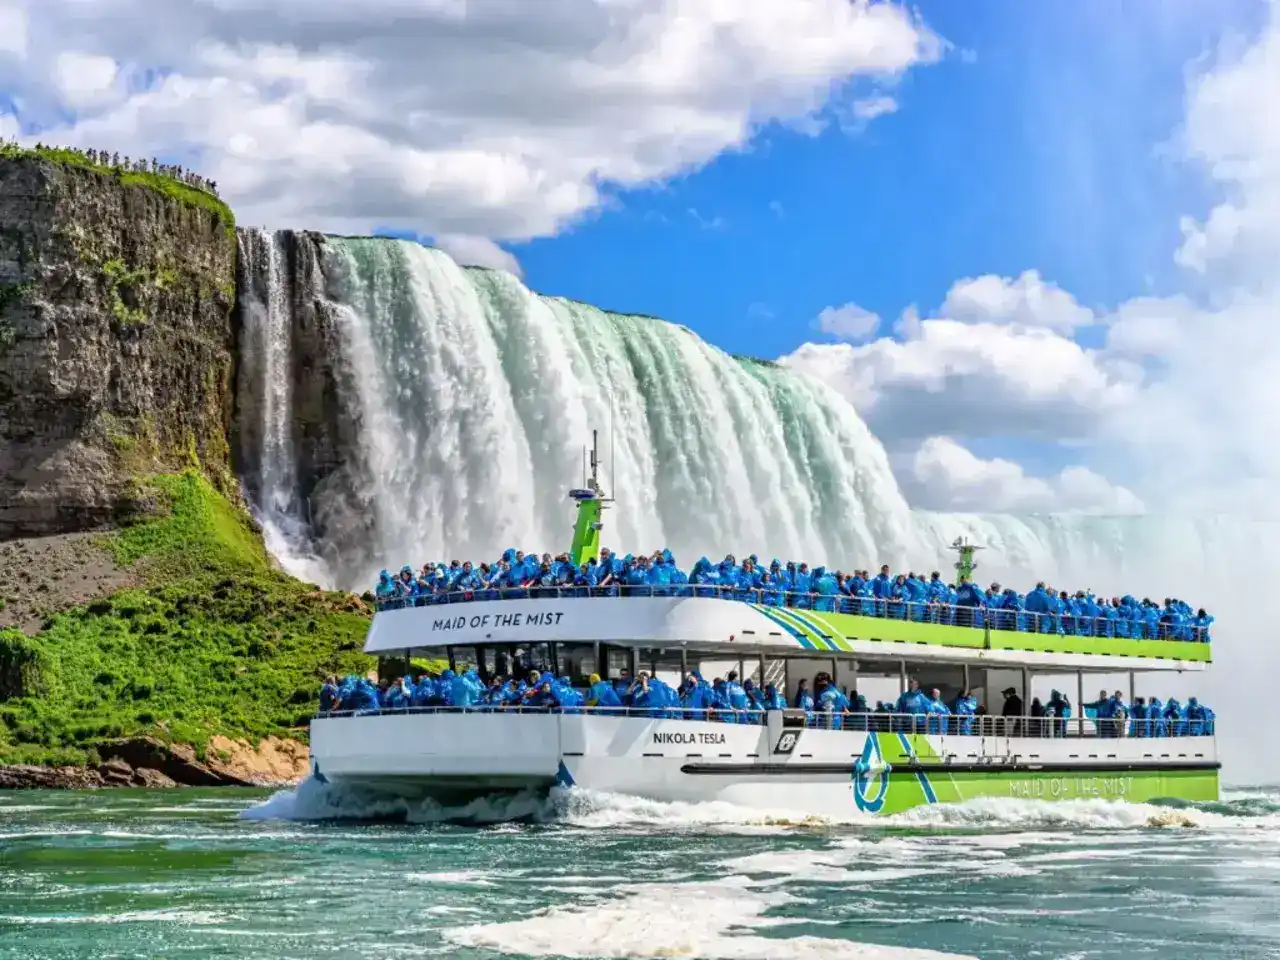 Image of Maid of the Mist boat tour